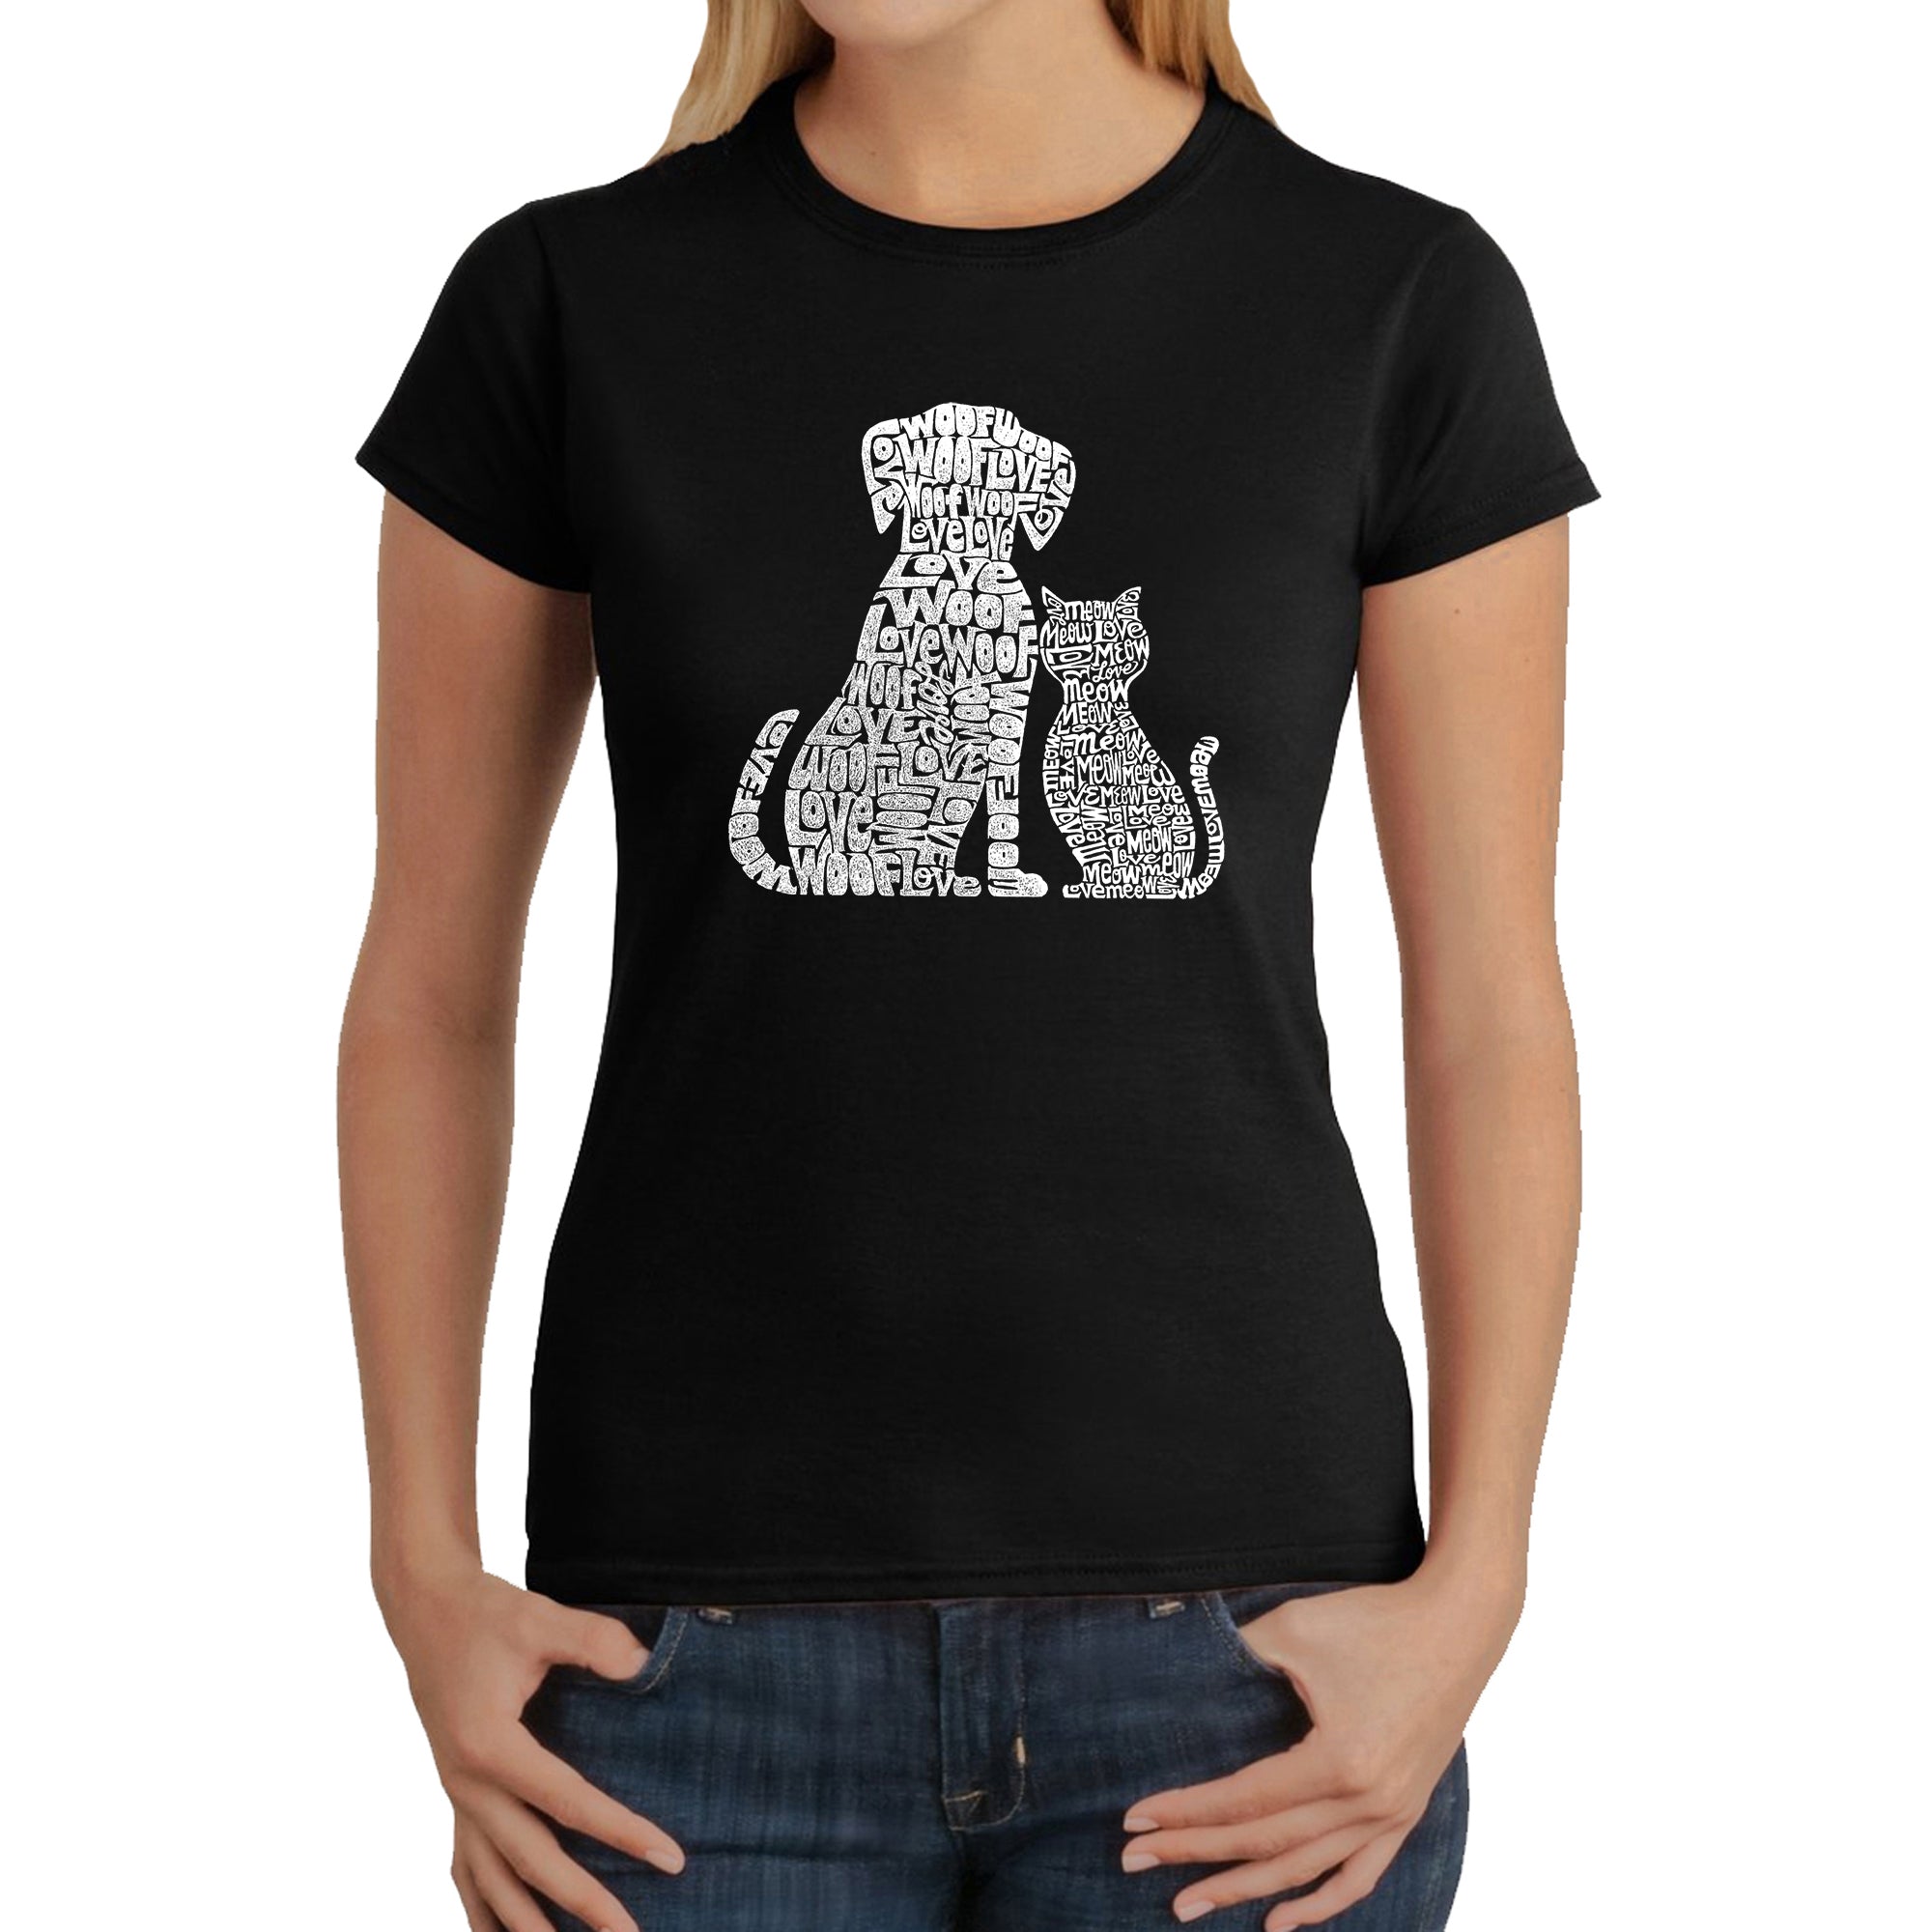 Dogs And Cats - Women's Word Art T-Shirt - Pink - Small